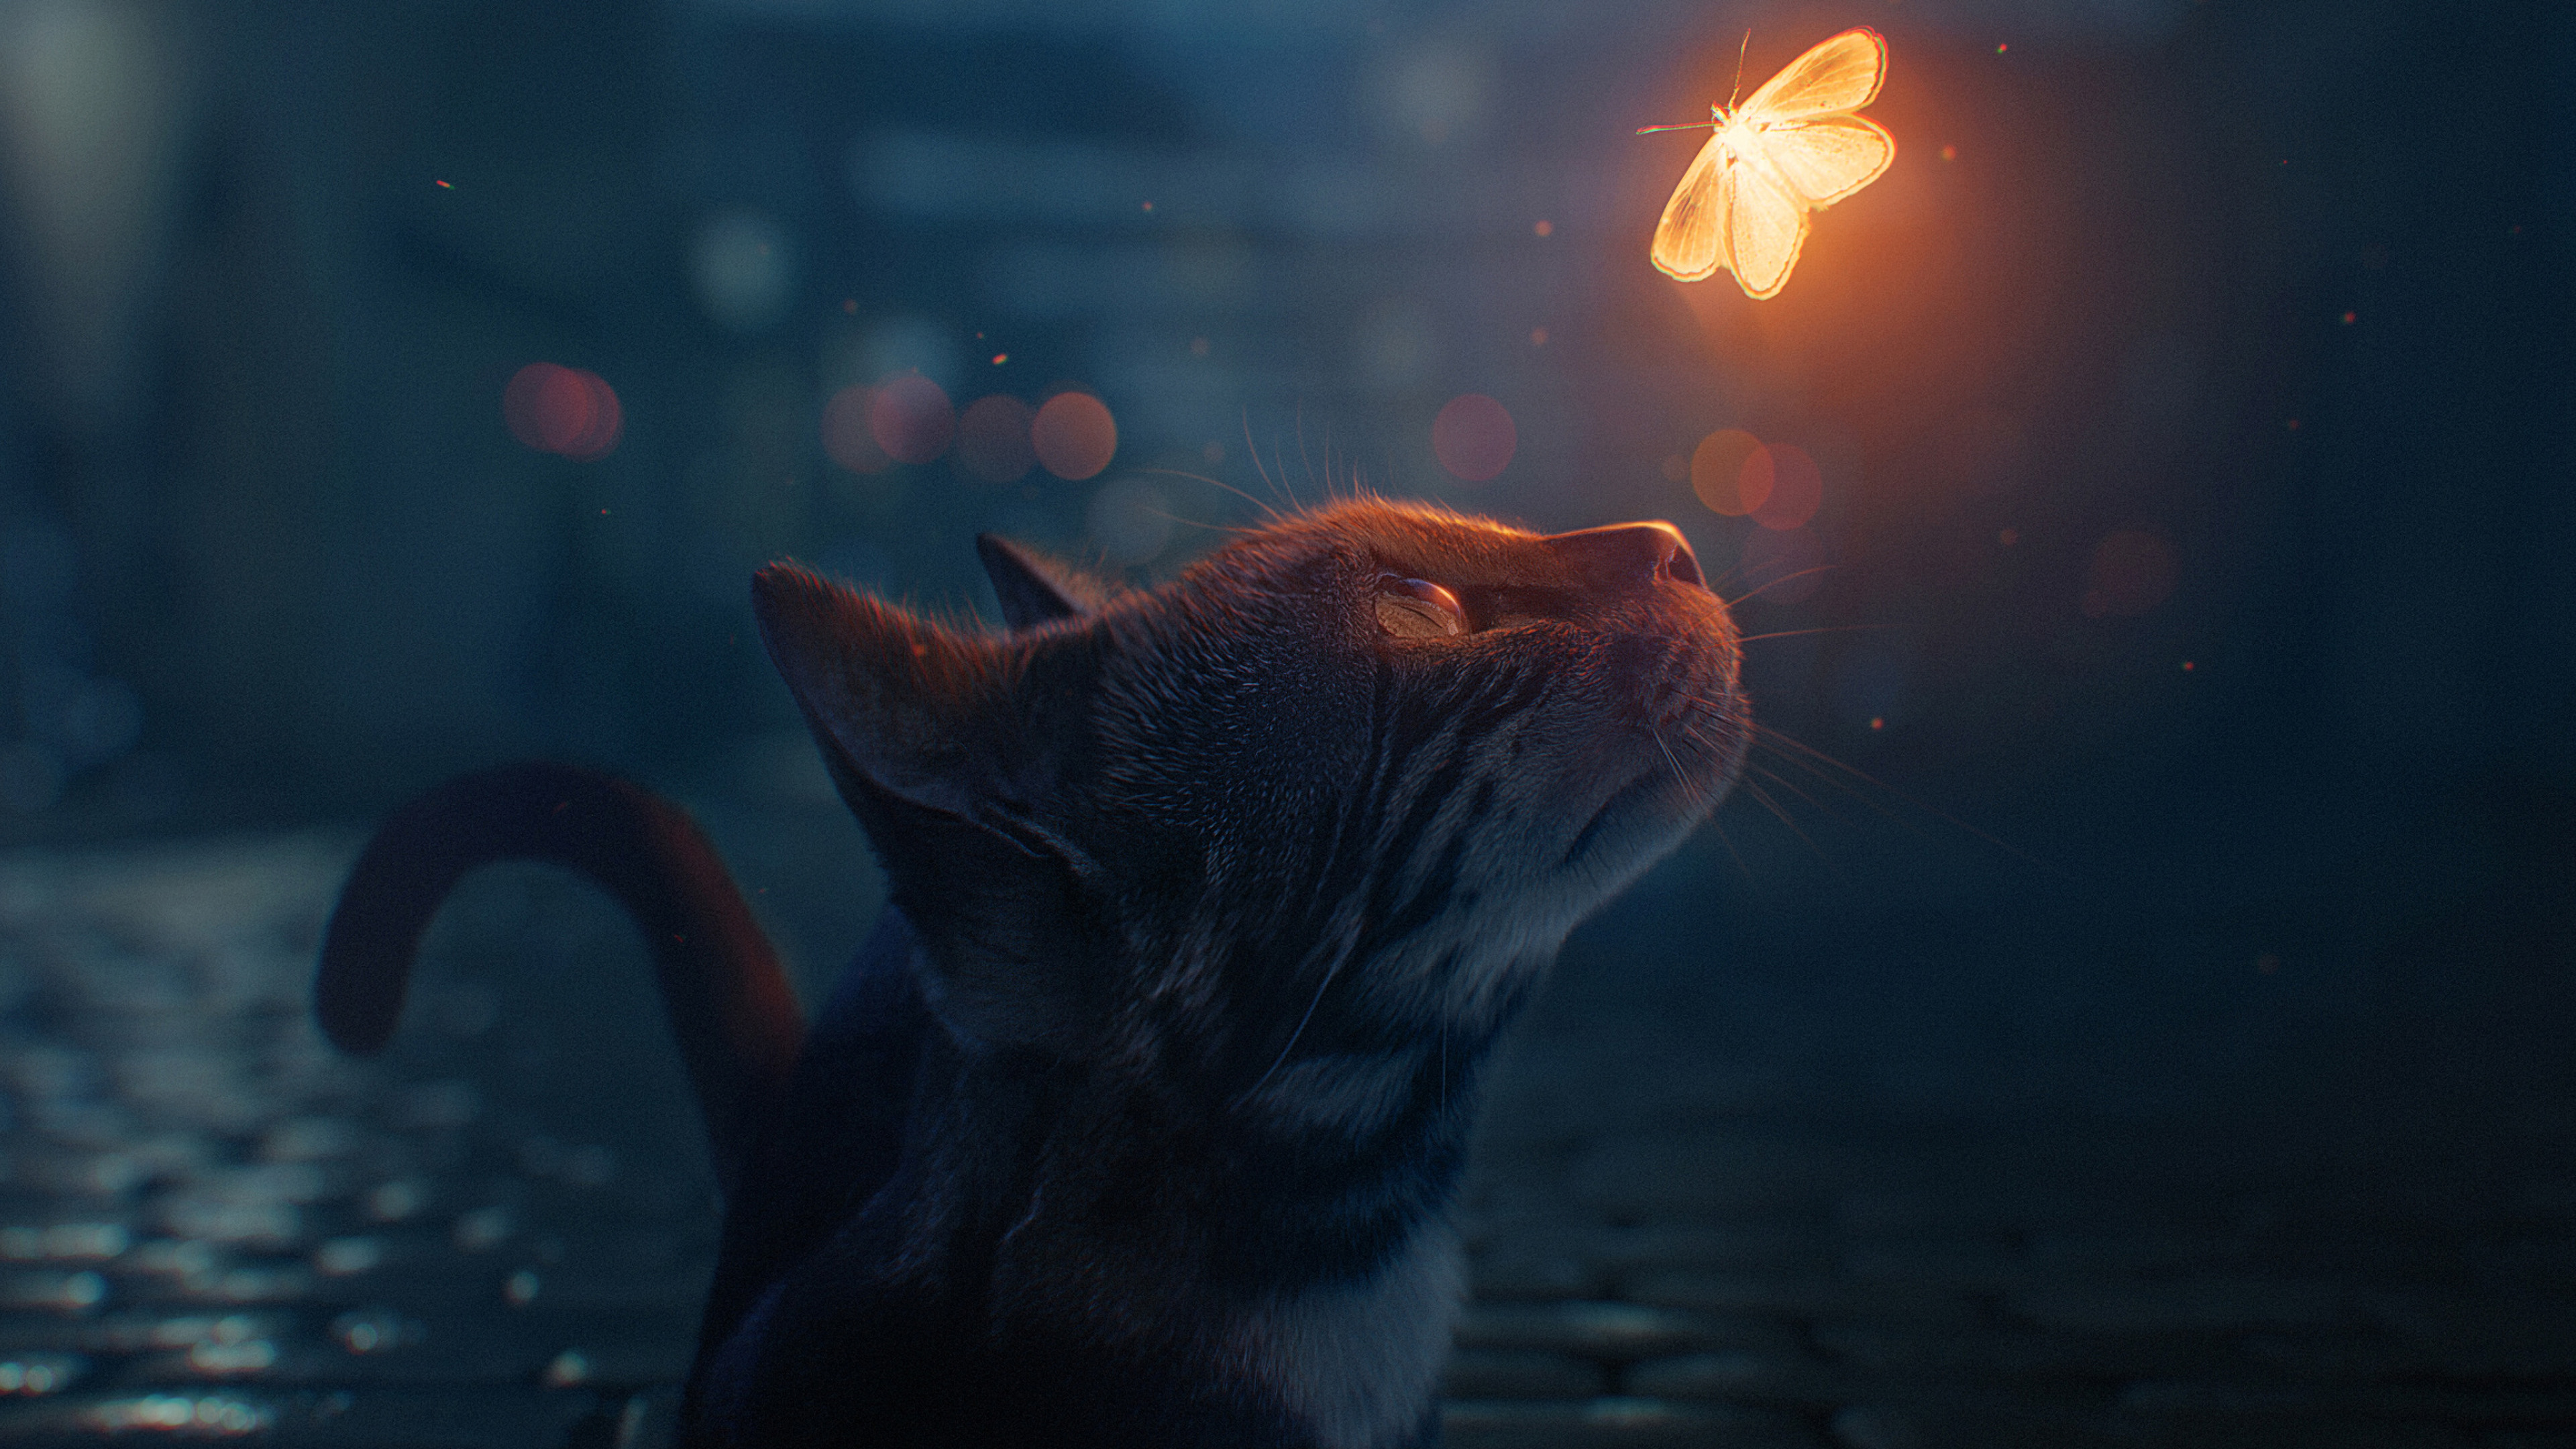 The Cat And Firefly 4k Wallpaper